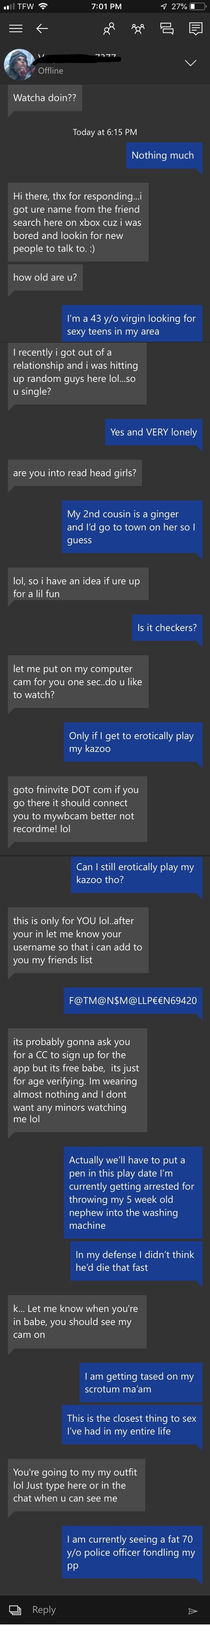 I got messaged by a bot on Xbox so I had some fun